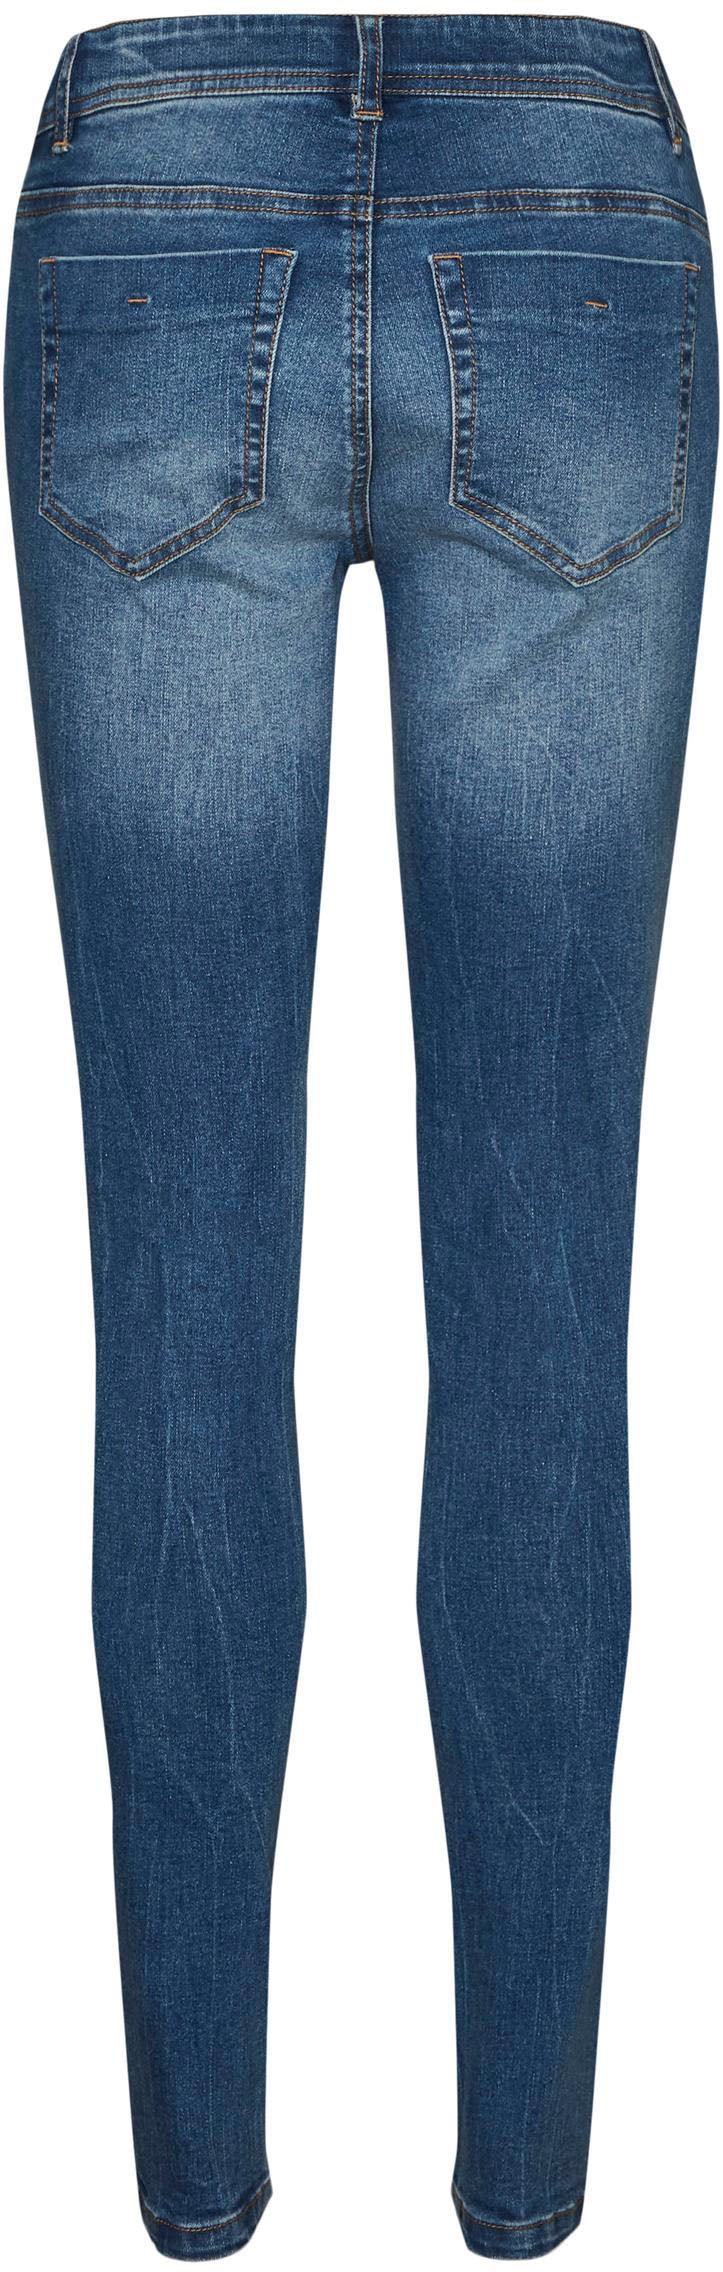 Mamalicious Slim-fit-Jeans »MLEVANS OTTOversand JEANS bei SLIM W. ELASTIC«